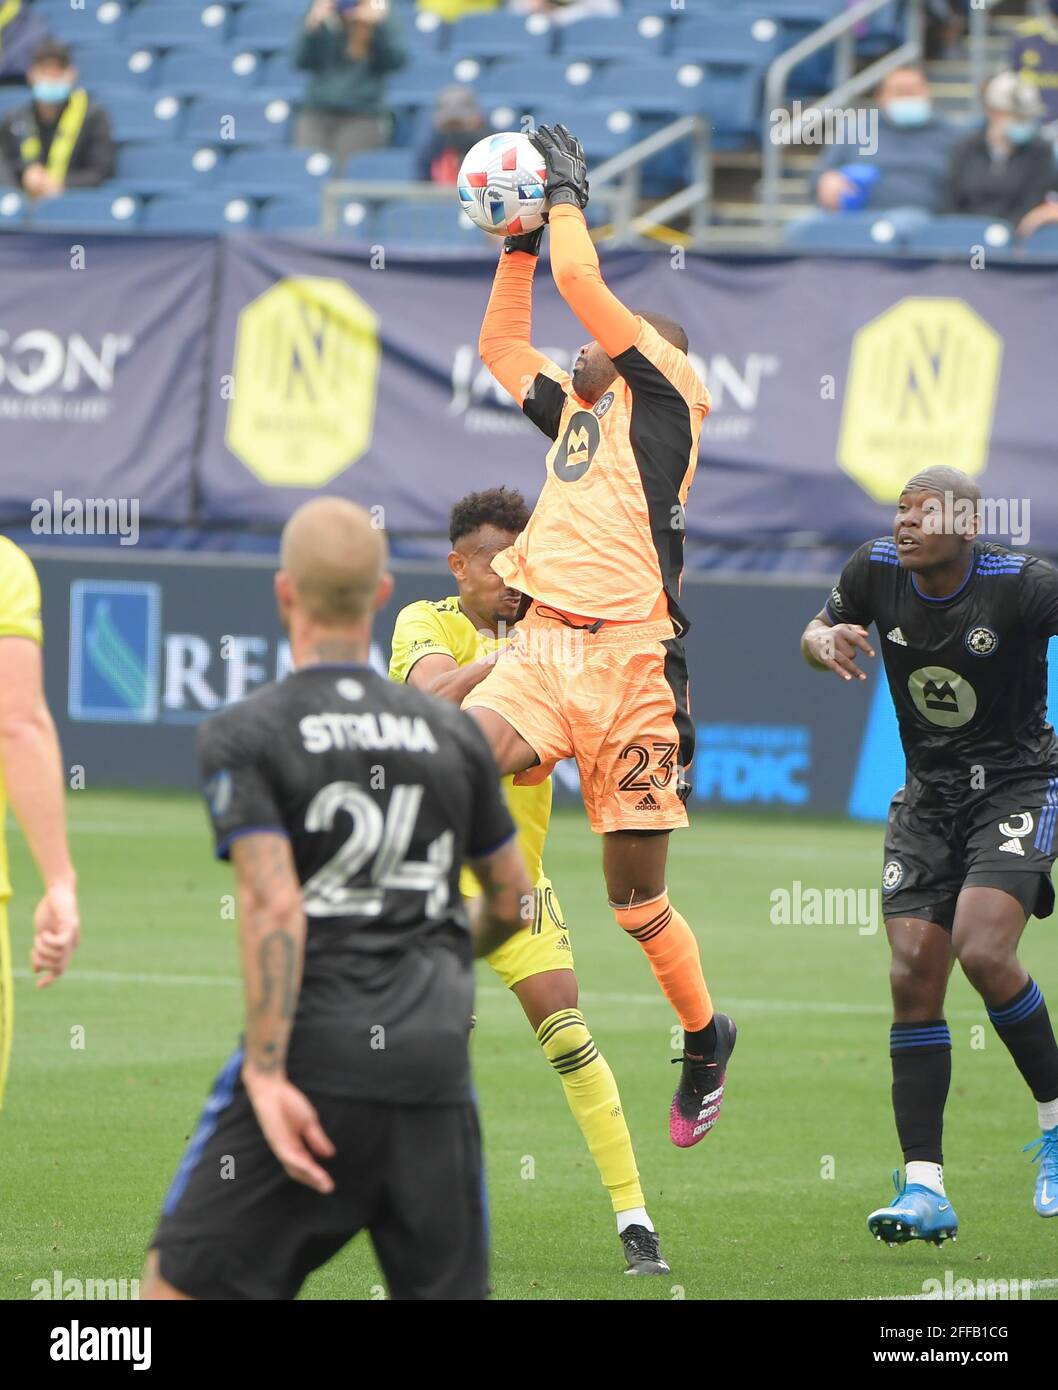 Nashville TN, USA. 24th Apr, 2021. CF MontrŽal goalkeeper Clement Diop (23) blocks the ball against the Nashville SC during the first half of an MLS game between the FC Montreal and the Nashville SC at Nissan Stadium in Nashville TN. Credit: csm/Alamy Live News Stock Photo